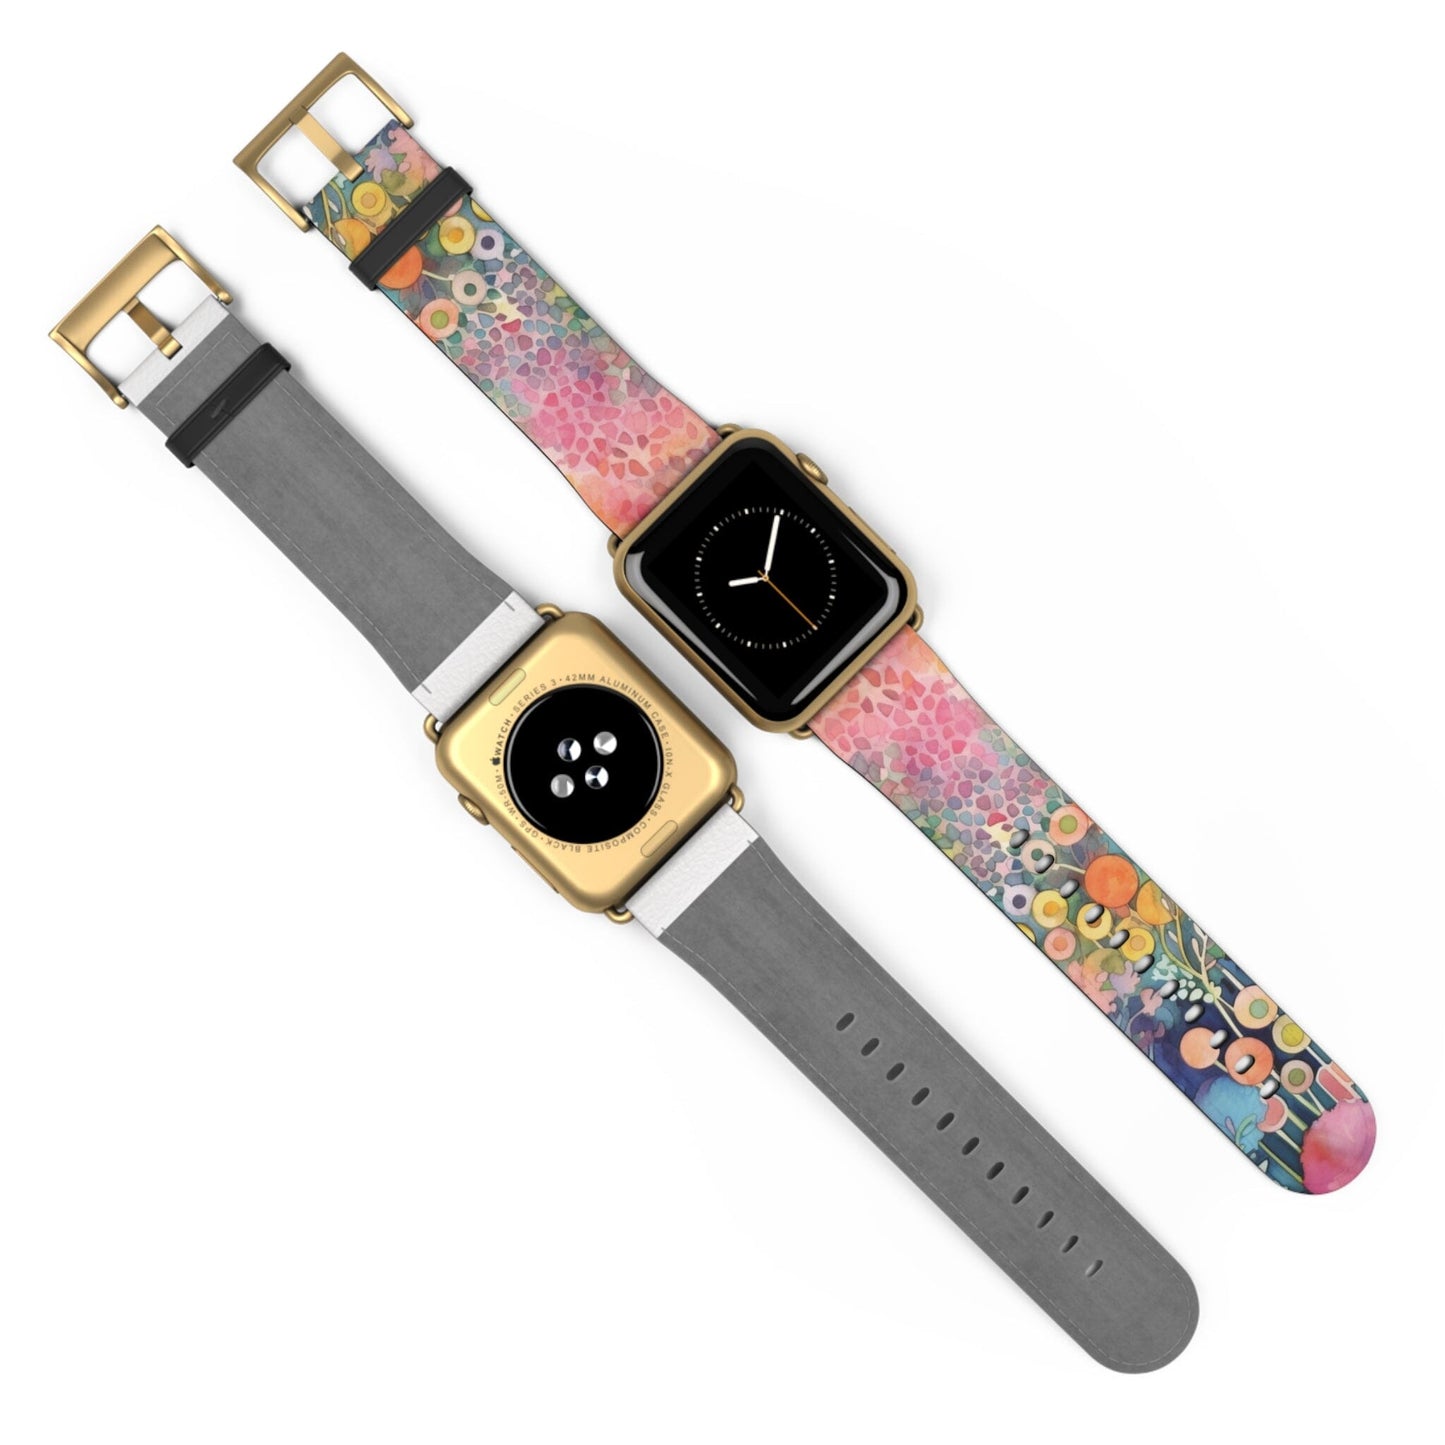 Pink Dream | Apple Watch Band Accessories